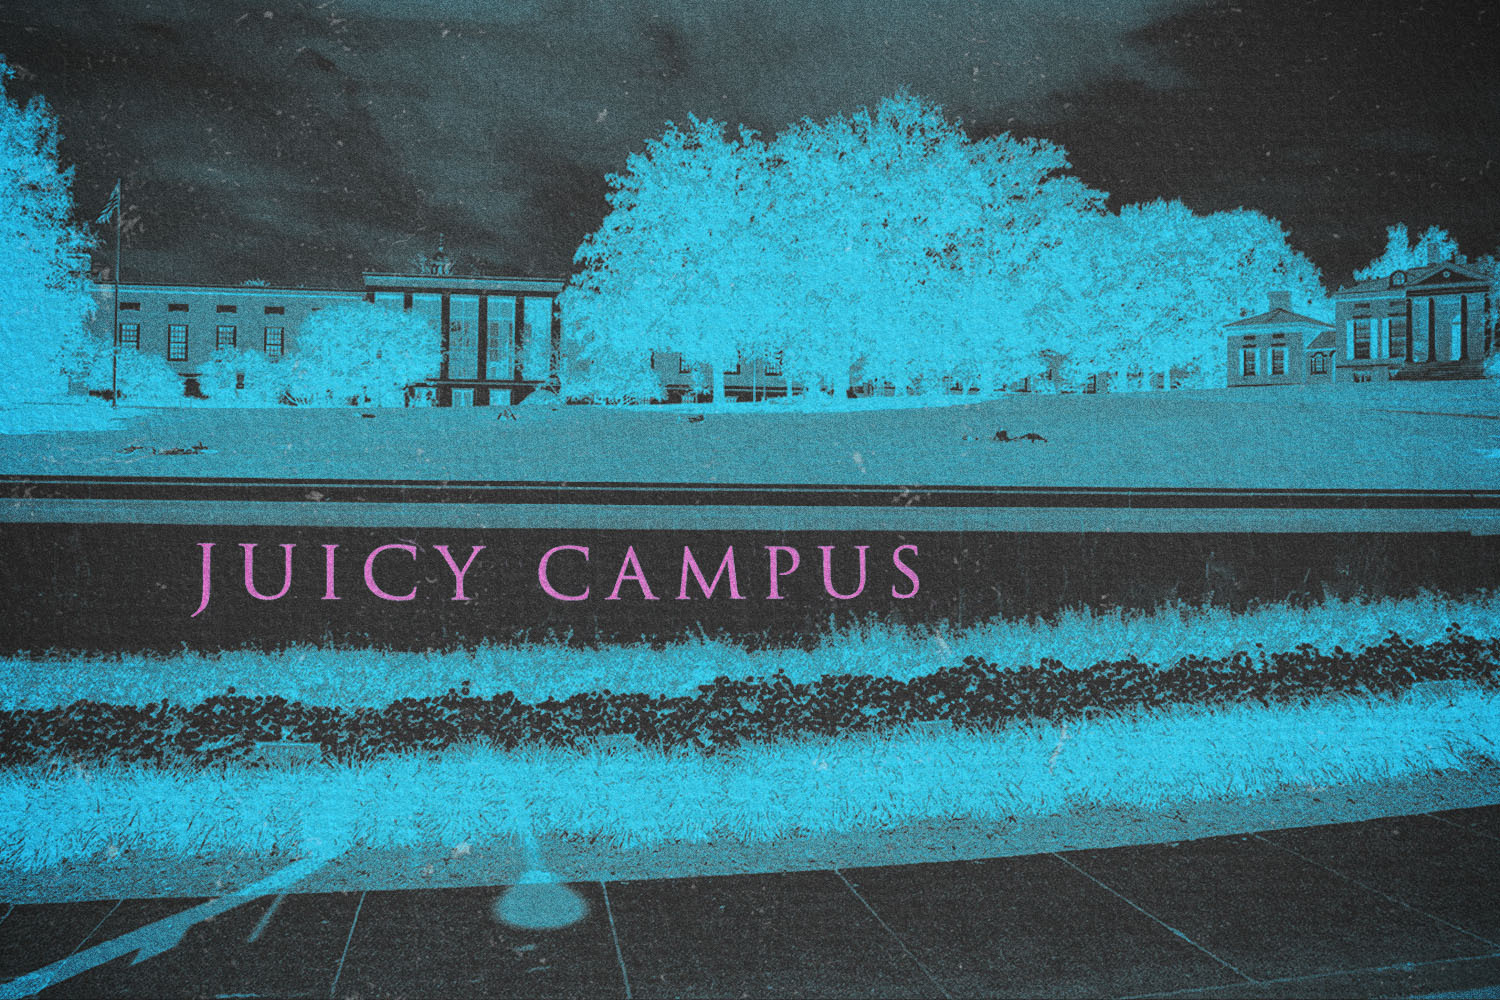 A stone retaining wall in front of a university quad emblazoned with the words "Juicy Campus"